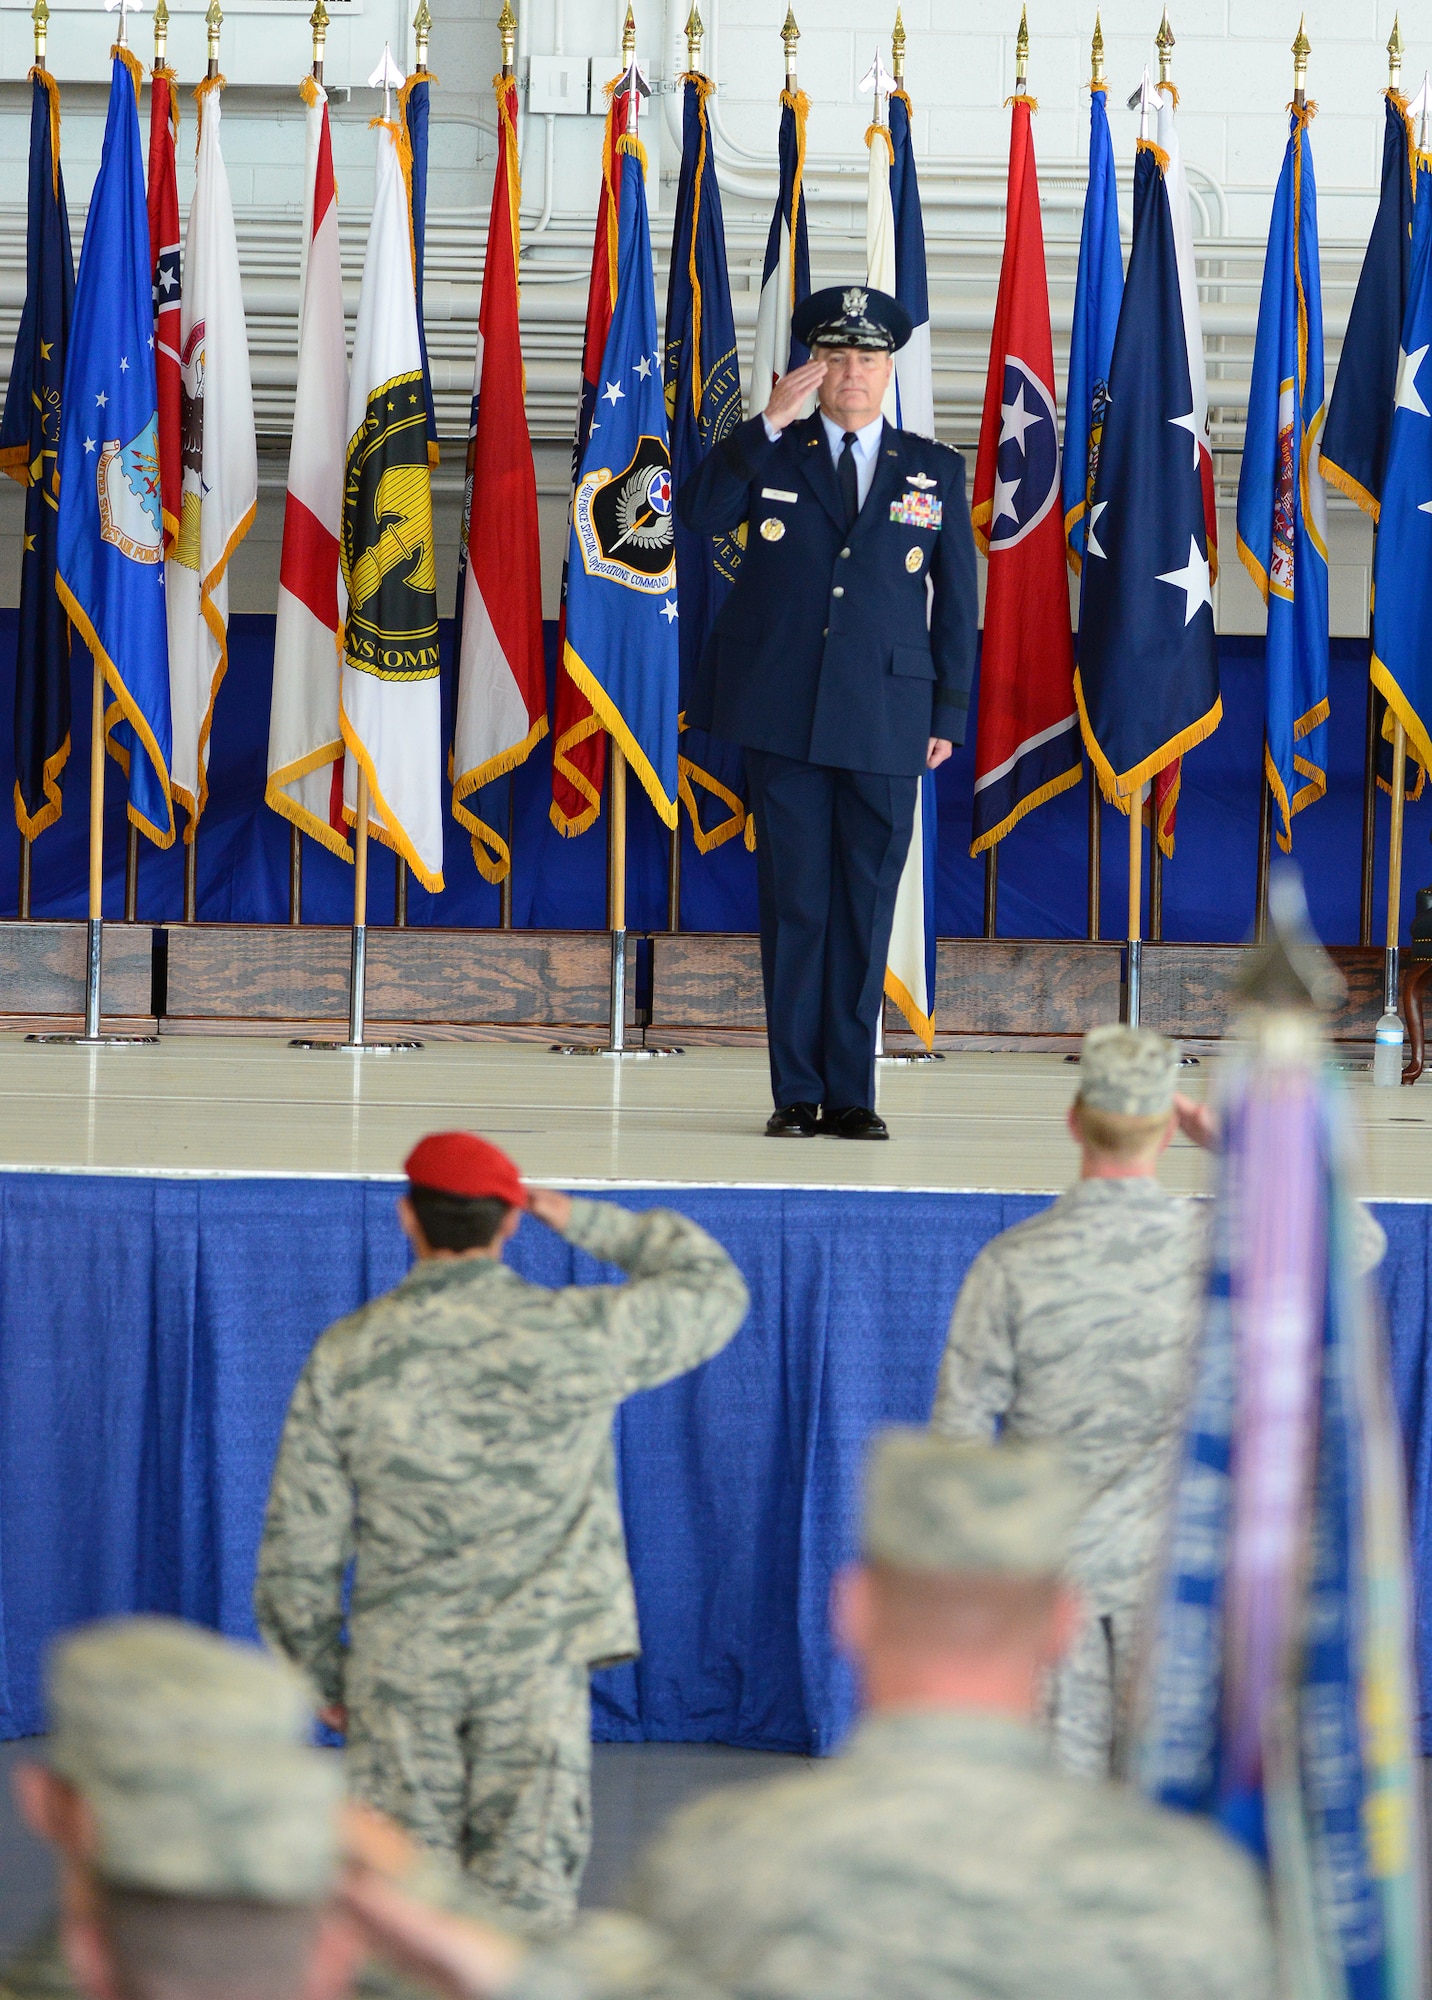 Air Force Chief of Staff Gen. Mark A. Welsh III is presented the command during the Air Force Special Operations Command change of command ceremony held at Hurlburt Field, Fla., July 3, 2014.  The command's mission is to present combat-ready Air Force Special Operations Forces to conduct and support global special operations missions. (U.S. Air Force photo by Master Sgt. Steven Pearsall)